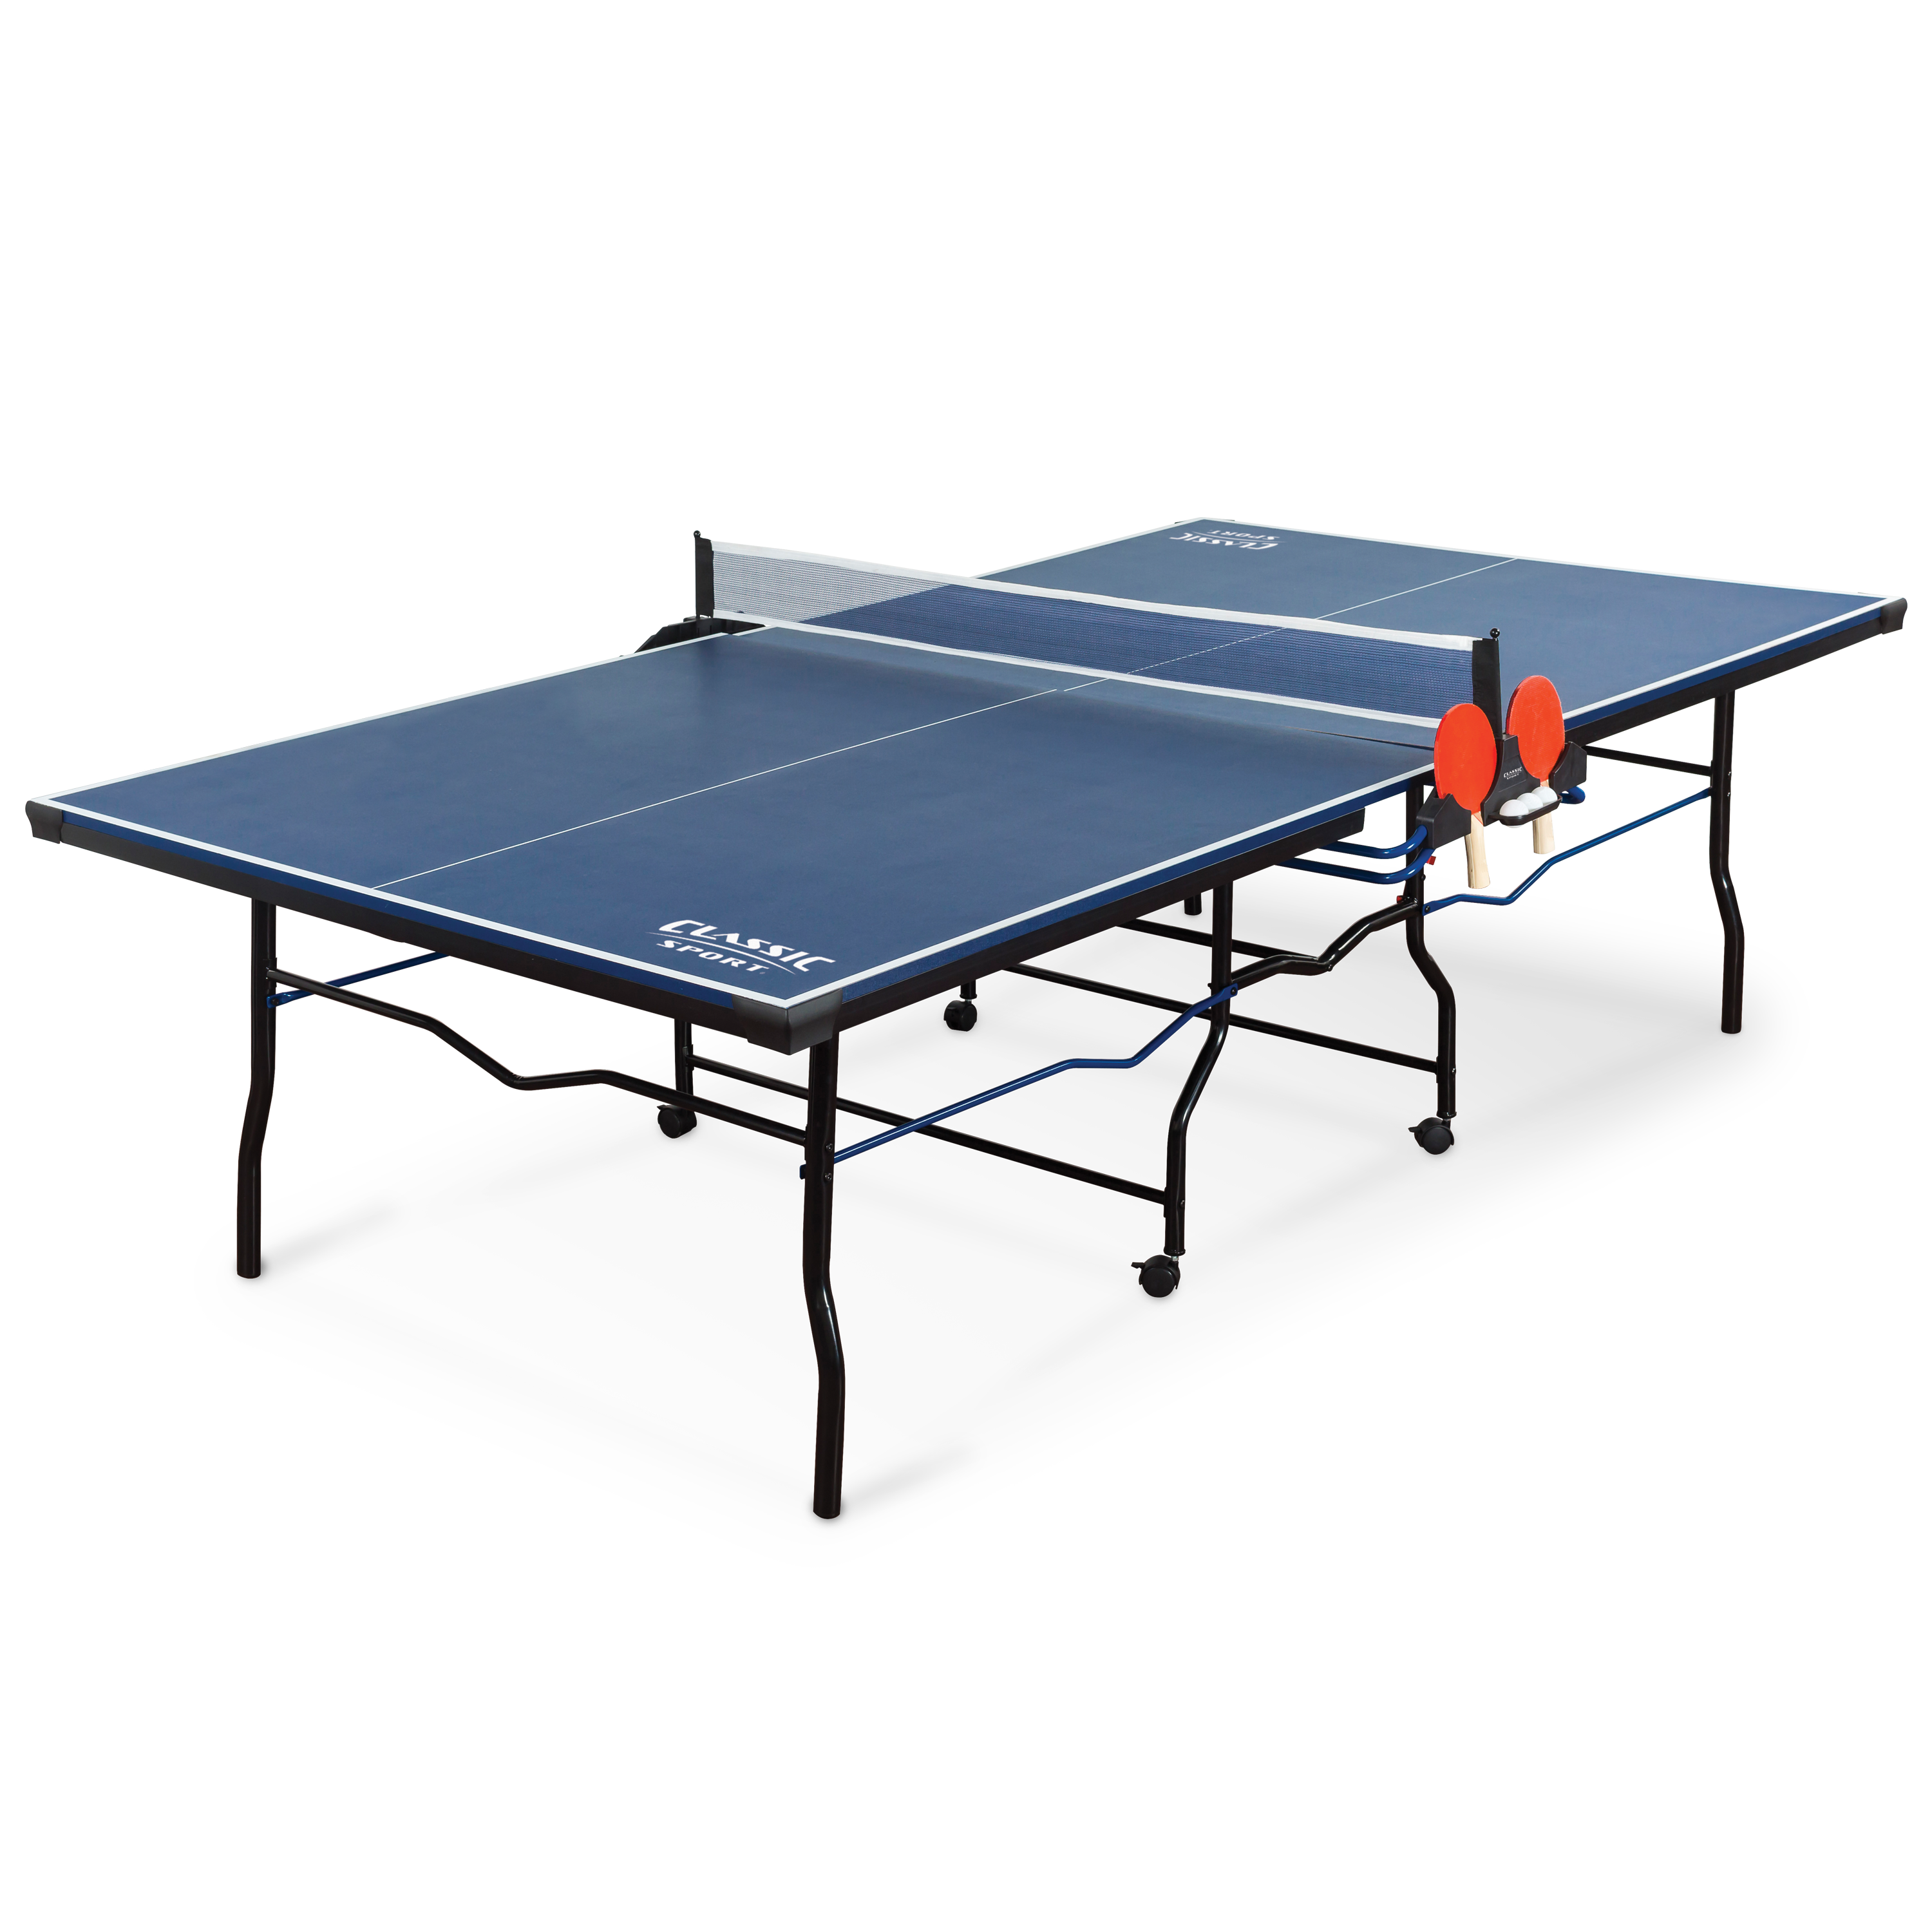 EastPoint Sports Classic Sport 15mm Table Tennis Table, Tournament Size 9 ft. x 5 ft. for Indoor Game Room - image 1 of 10